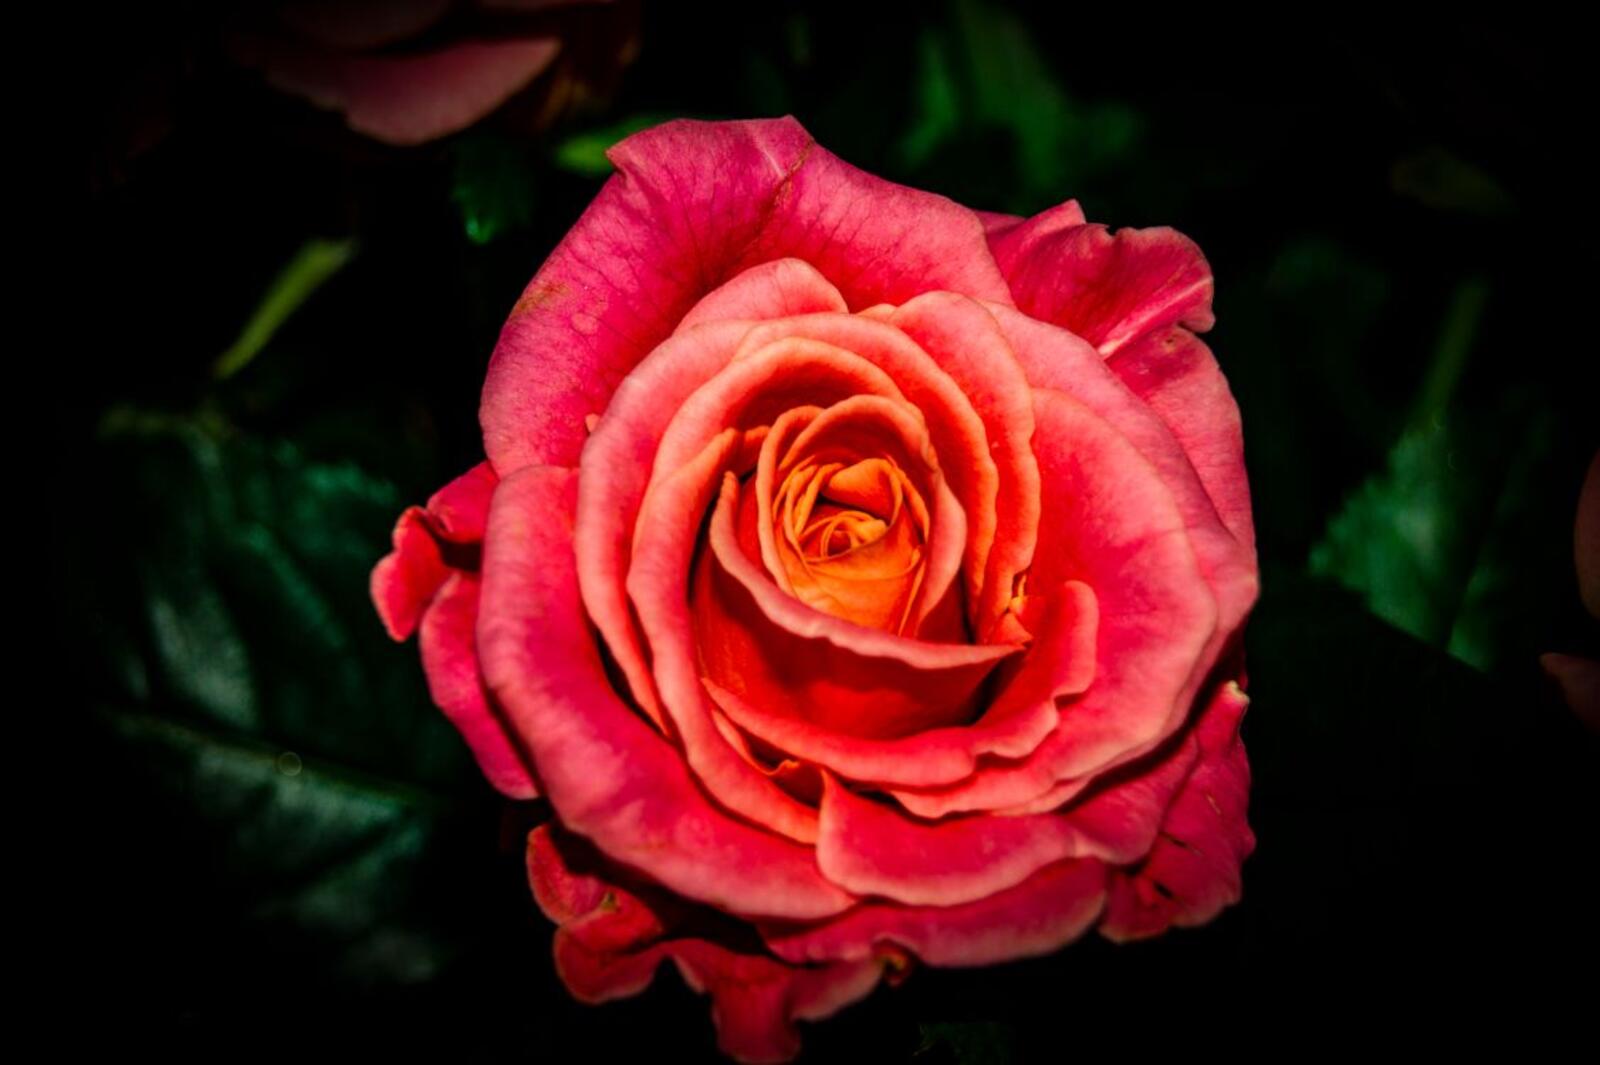 Free photo Rose on a dark background. Coral shade.